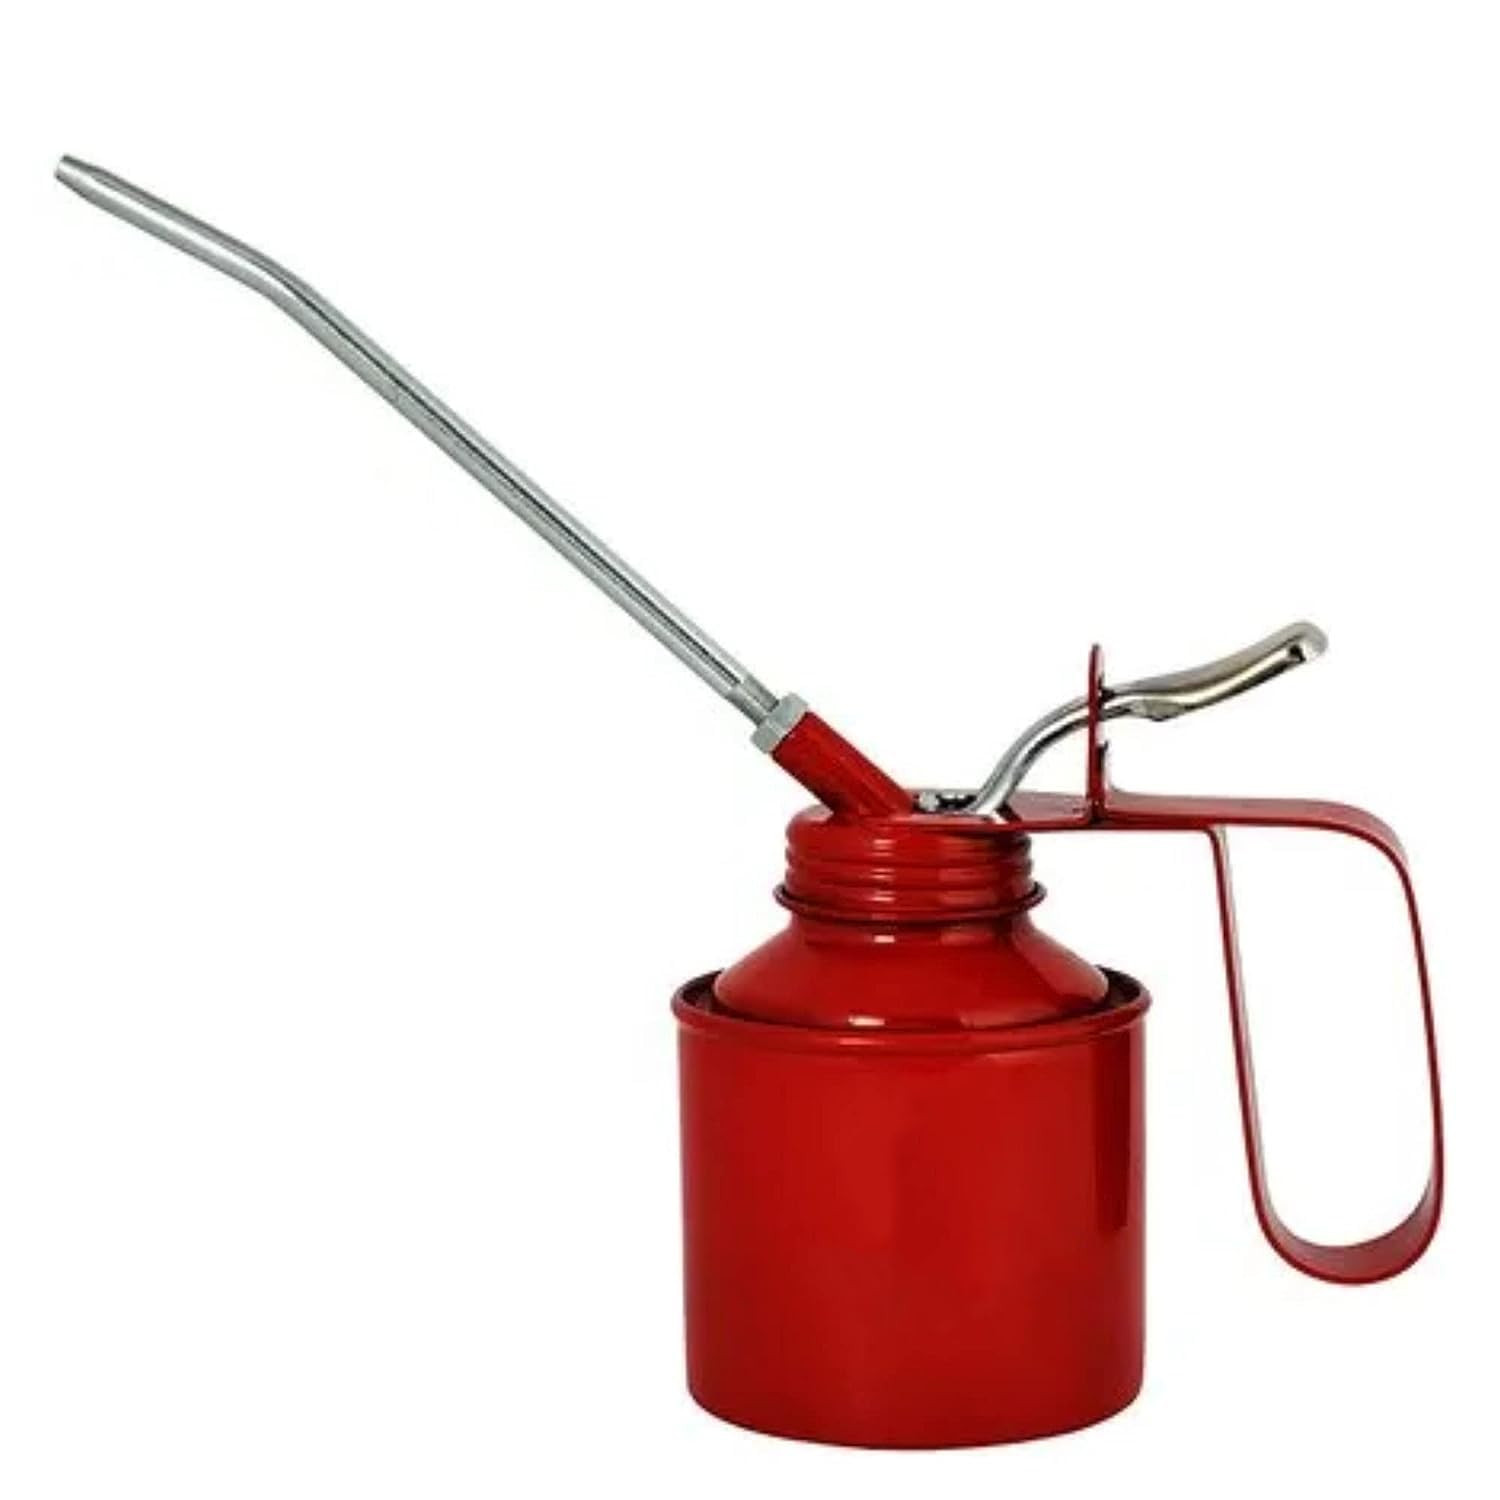 Kuber Industries Lubricant Dispenser|Pint Oil Can|Oil Can for Vehicles|Oil CanPump Oiler with Fixed Spout| All Lubrication Need (Red)